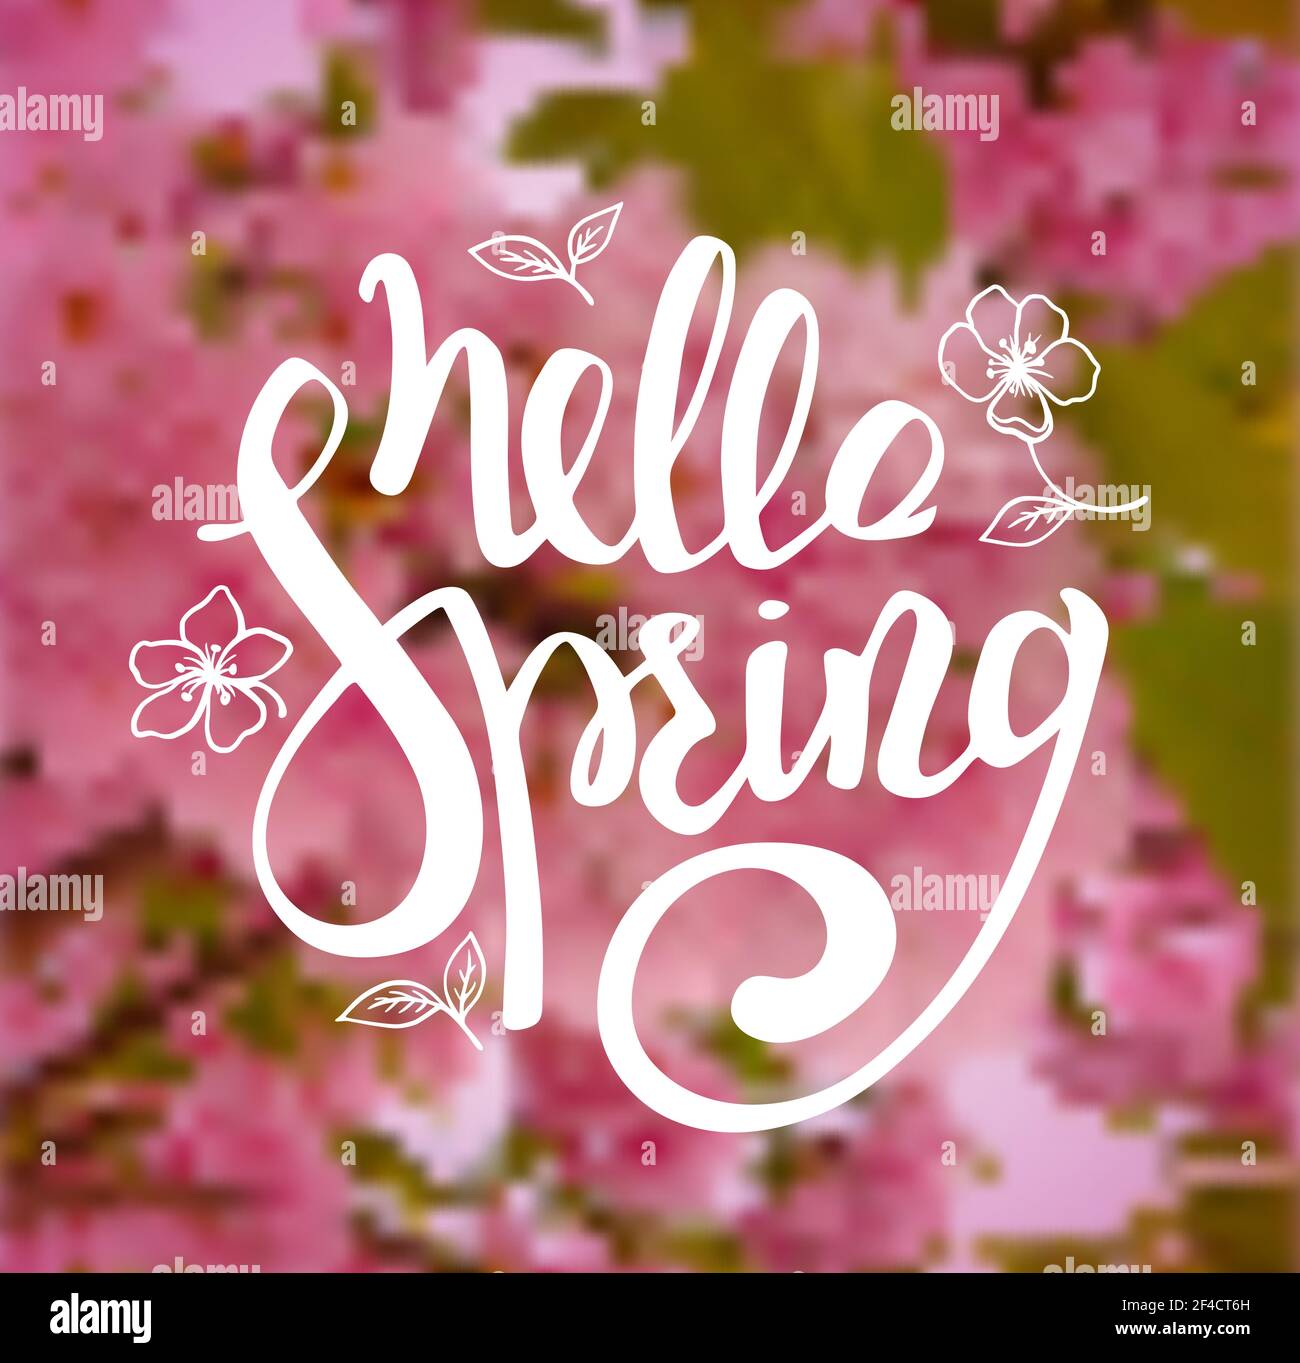 Spring blurred background with pink flowering cherry branch and hand drawn text. Hello spring lettering. Vector illustration. Stock Vector